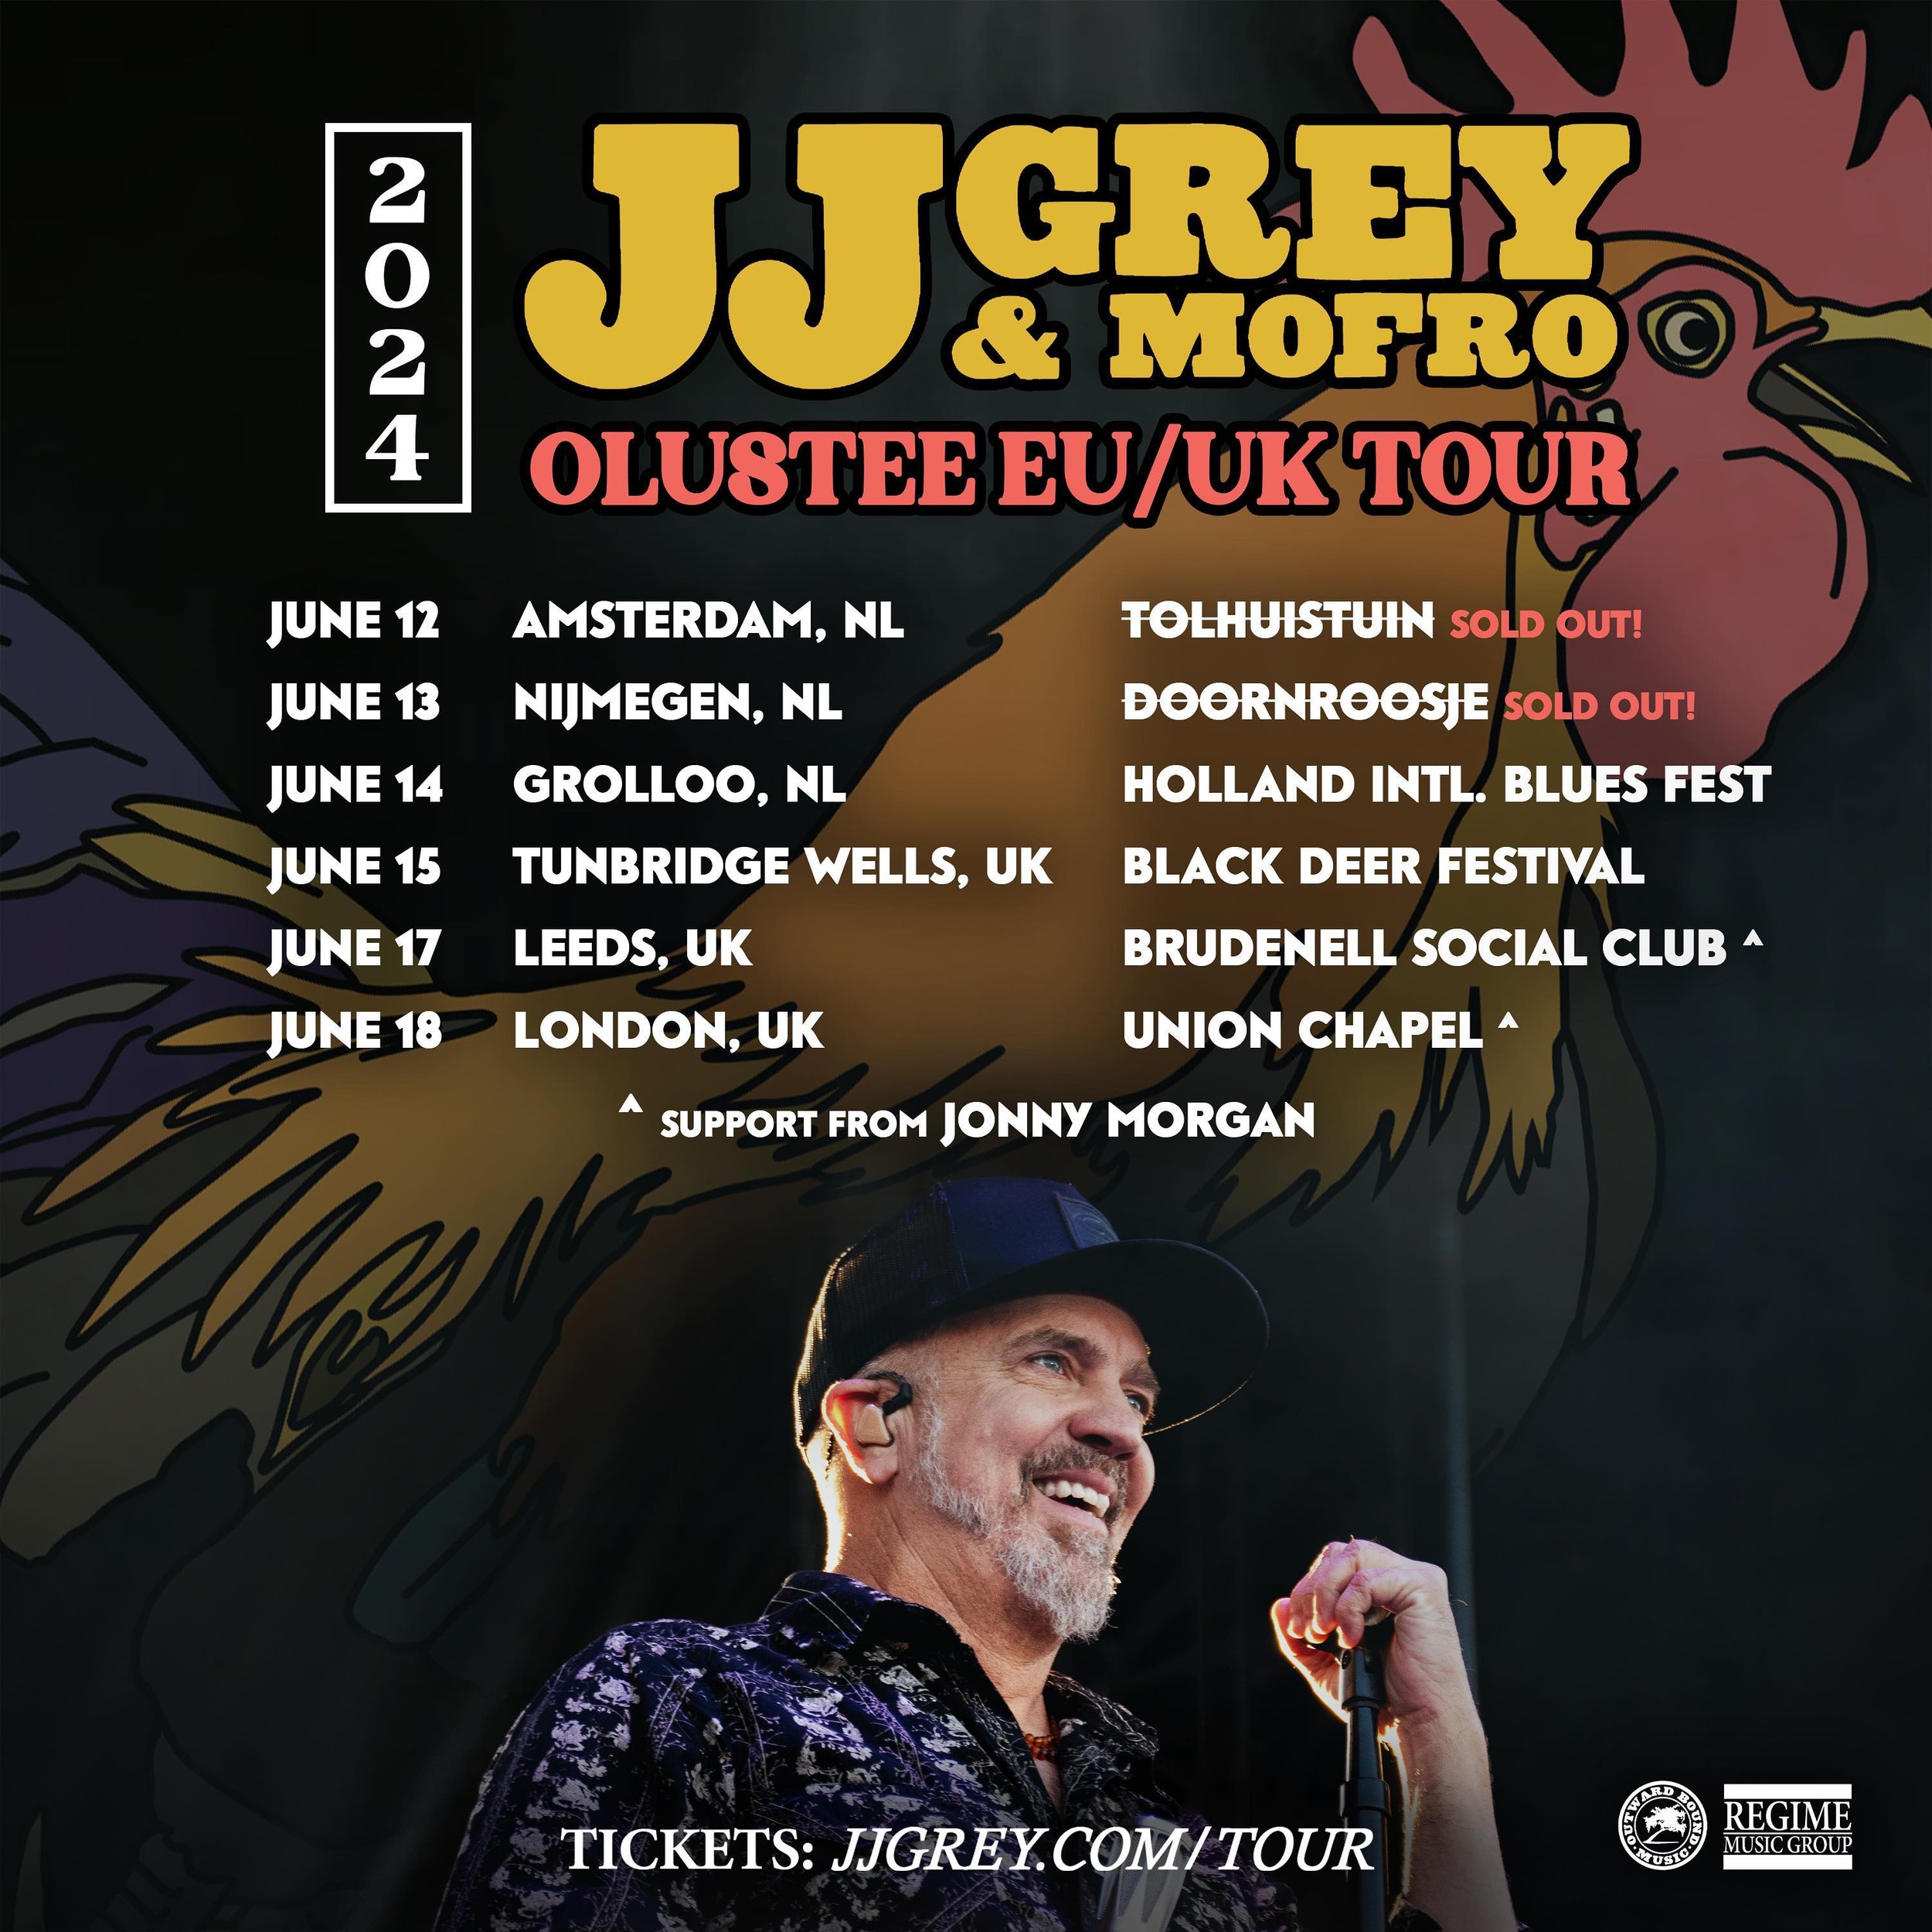 We&rsquo;re ready to head across the pond this June!  Netherlands club dates are sold out and London + Leeds are not far behind&hellip;.plus, @JonnyMorganMusic has just been added to open! Tickets available at the link in my bio 🎟 

Jun 12 - Amsterd